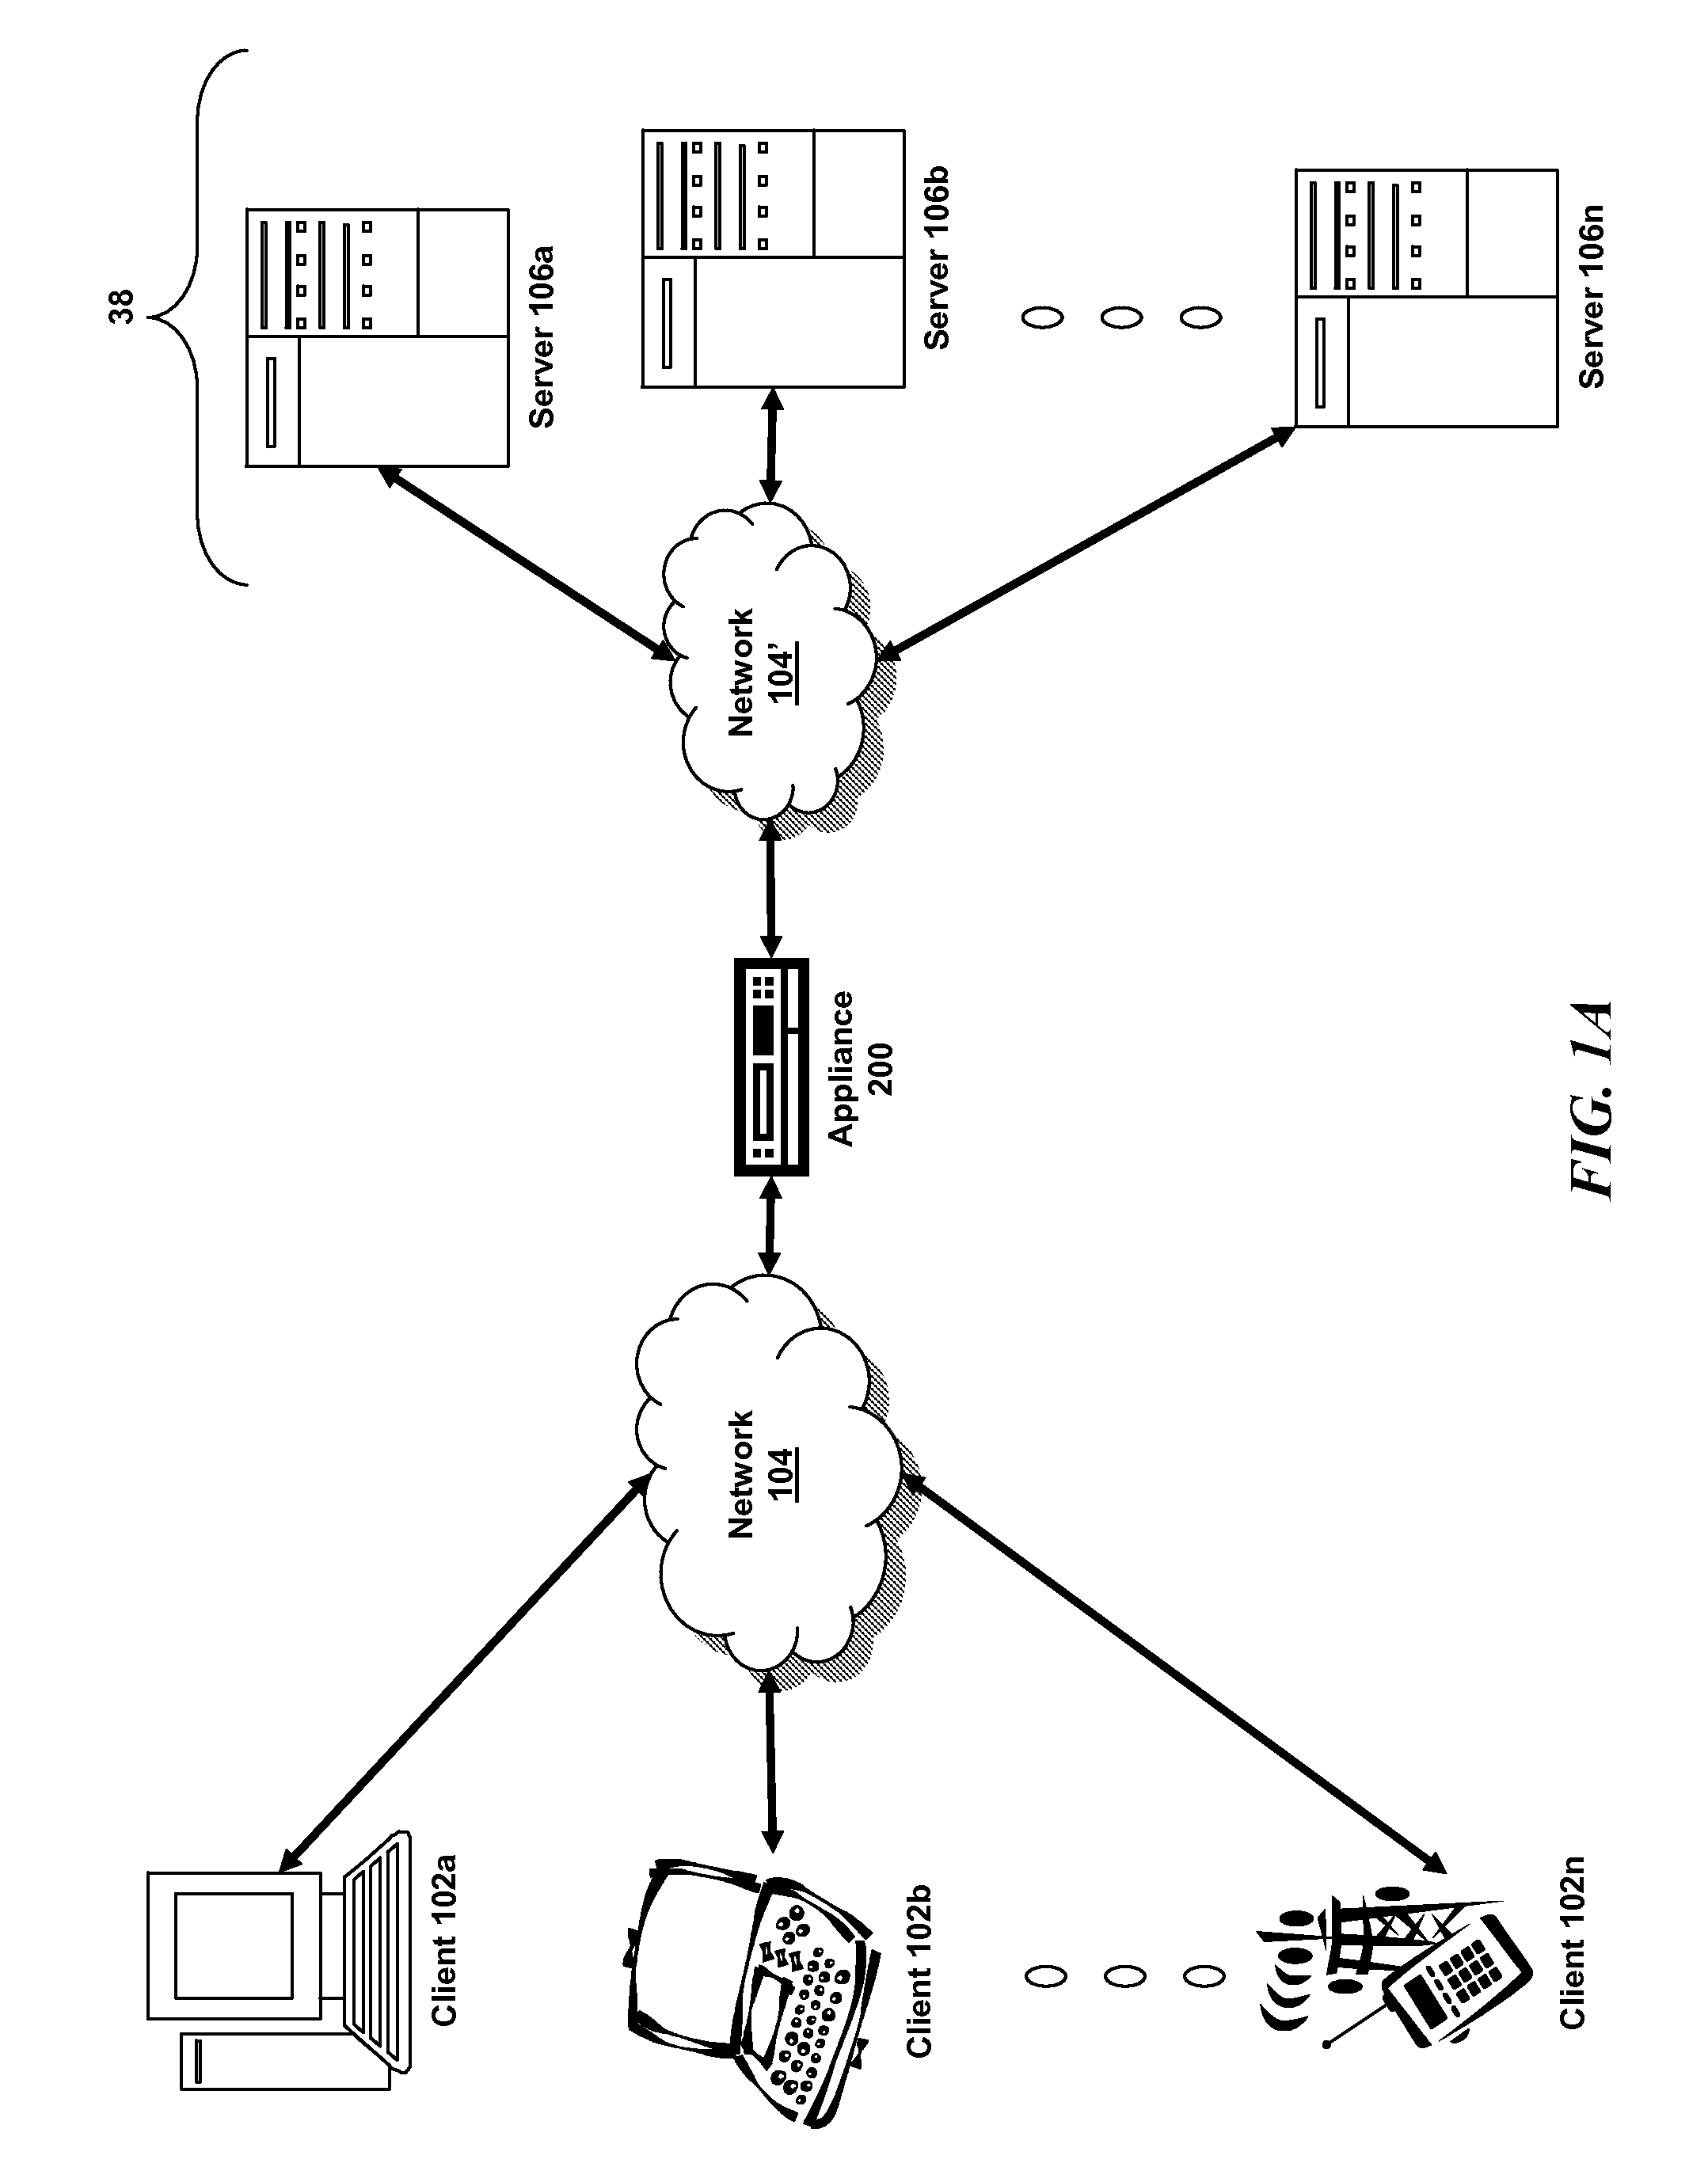 Systems and methods for providing and updating a unified client